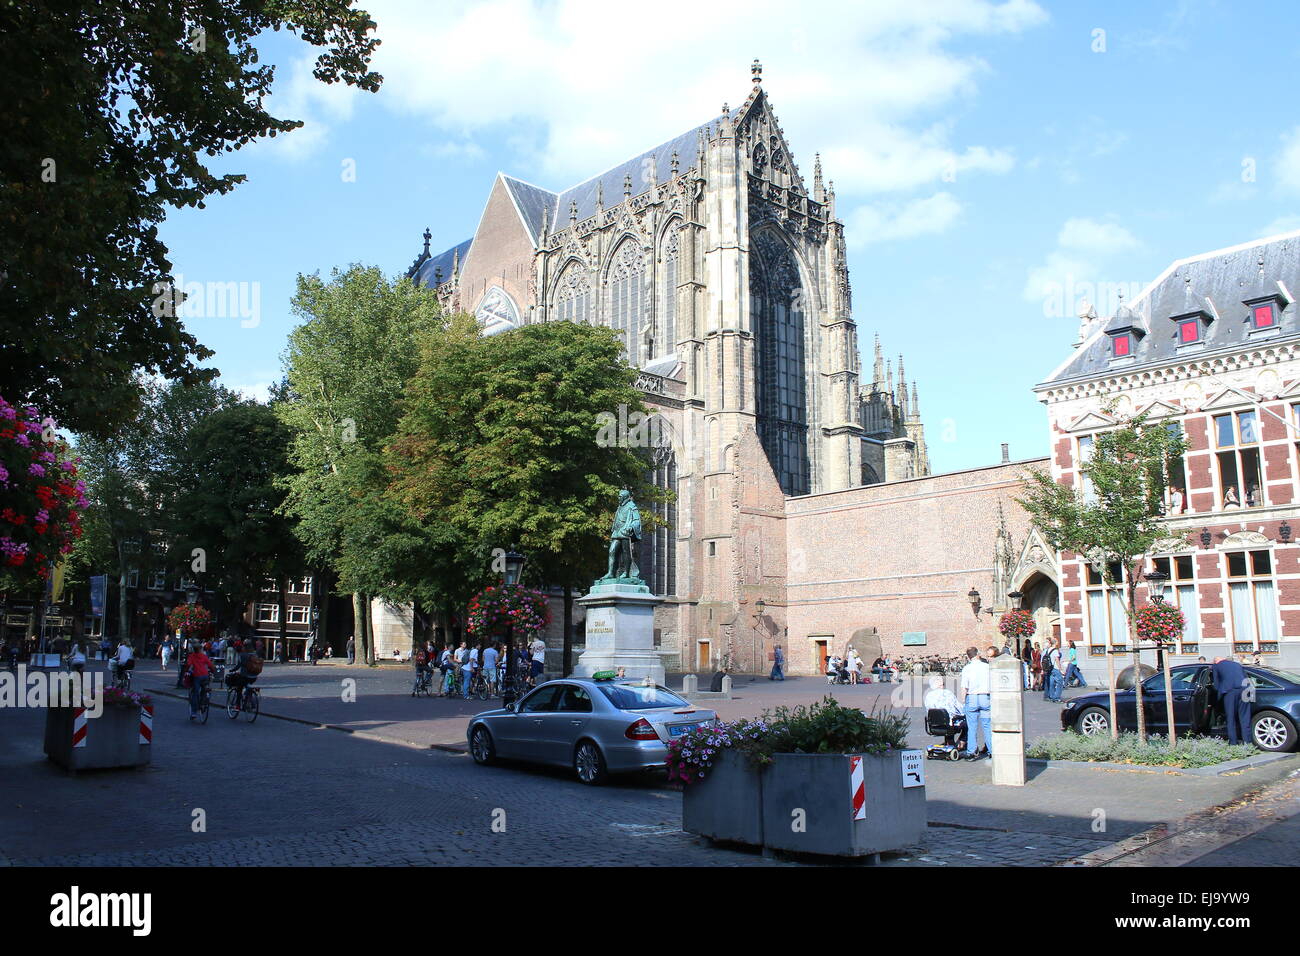 Exterior of the gothic Dom church or St. Martin's Cathedral at Domplein square in Utrecht, The Netherlands Stock Photo